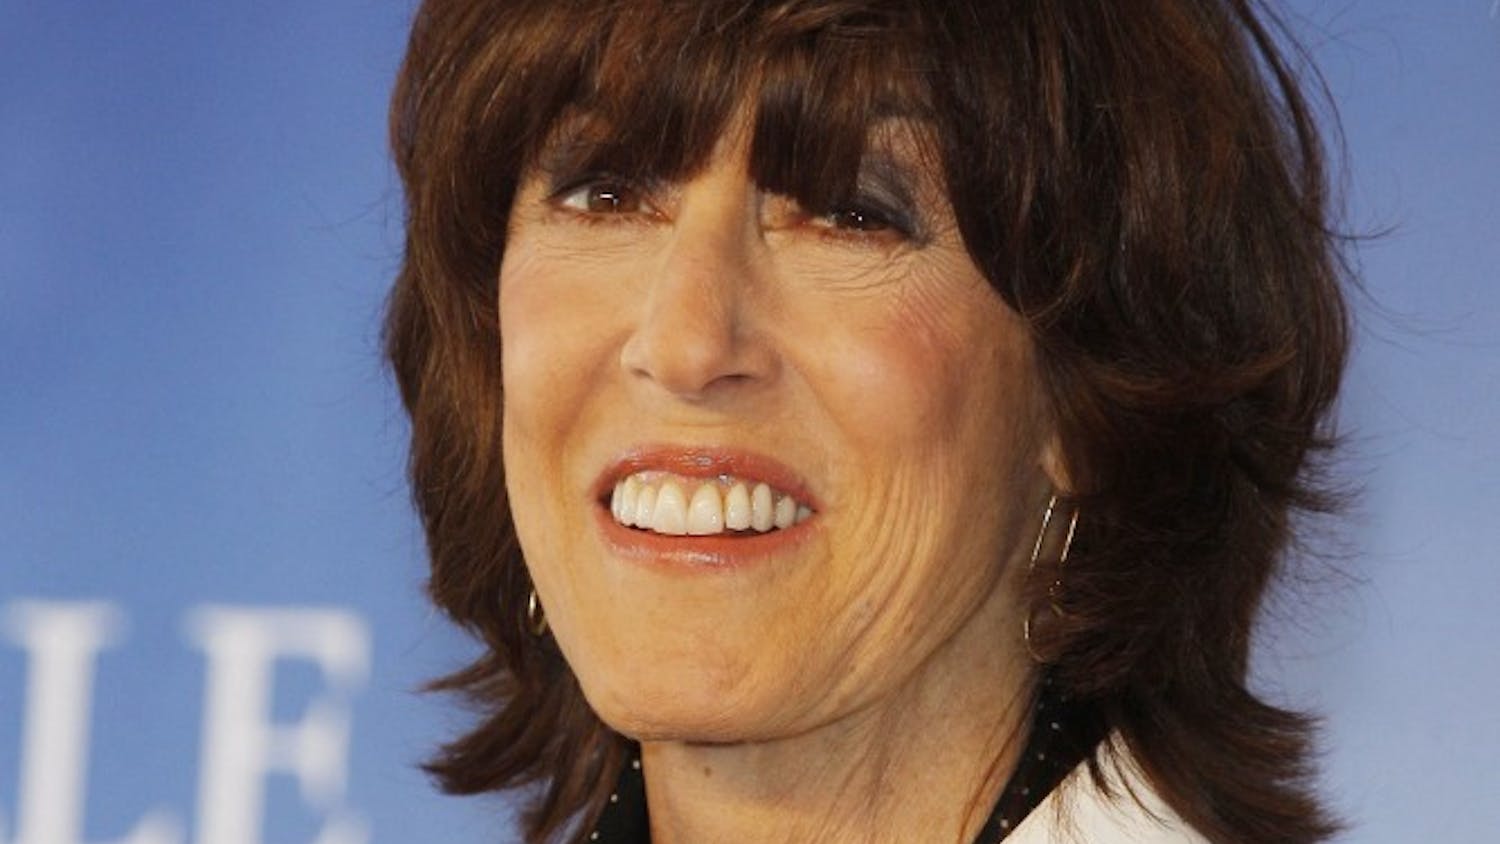 Director Nora Ephron, seen in this file photo from September 2009, died June 26, 2012, in New York. She was 71. Ephron's hit movies included: "Sleepless in Seattle," "When Harry Met Sally," and "Julie & Julia." (Denis Guignebourg/Abaca Press/MCT)